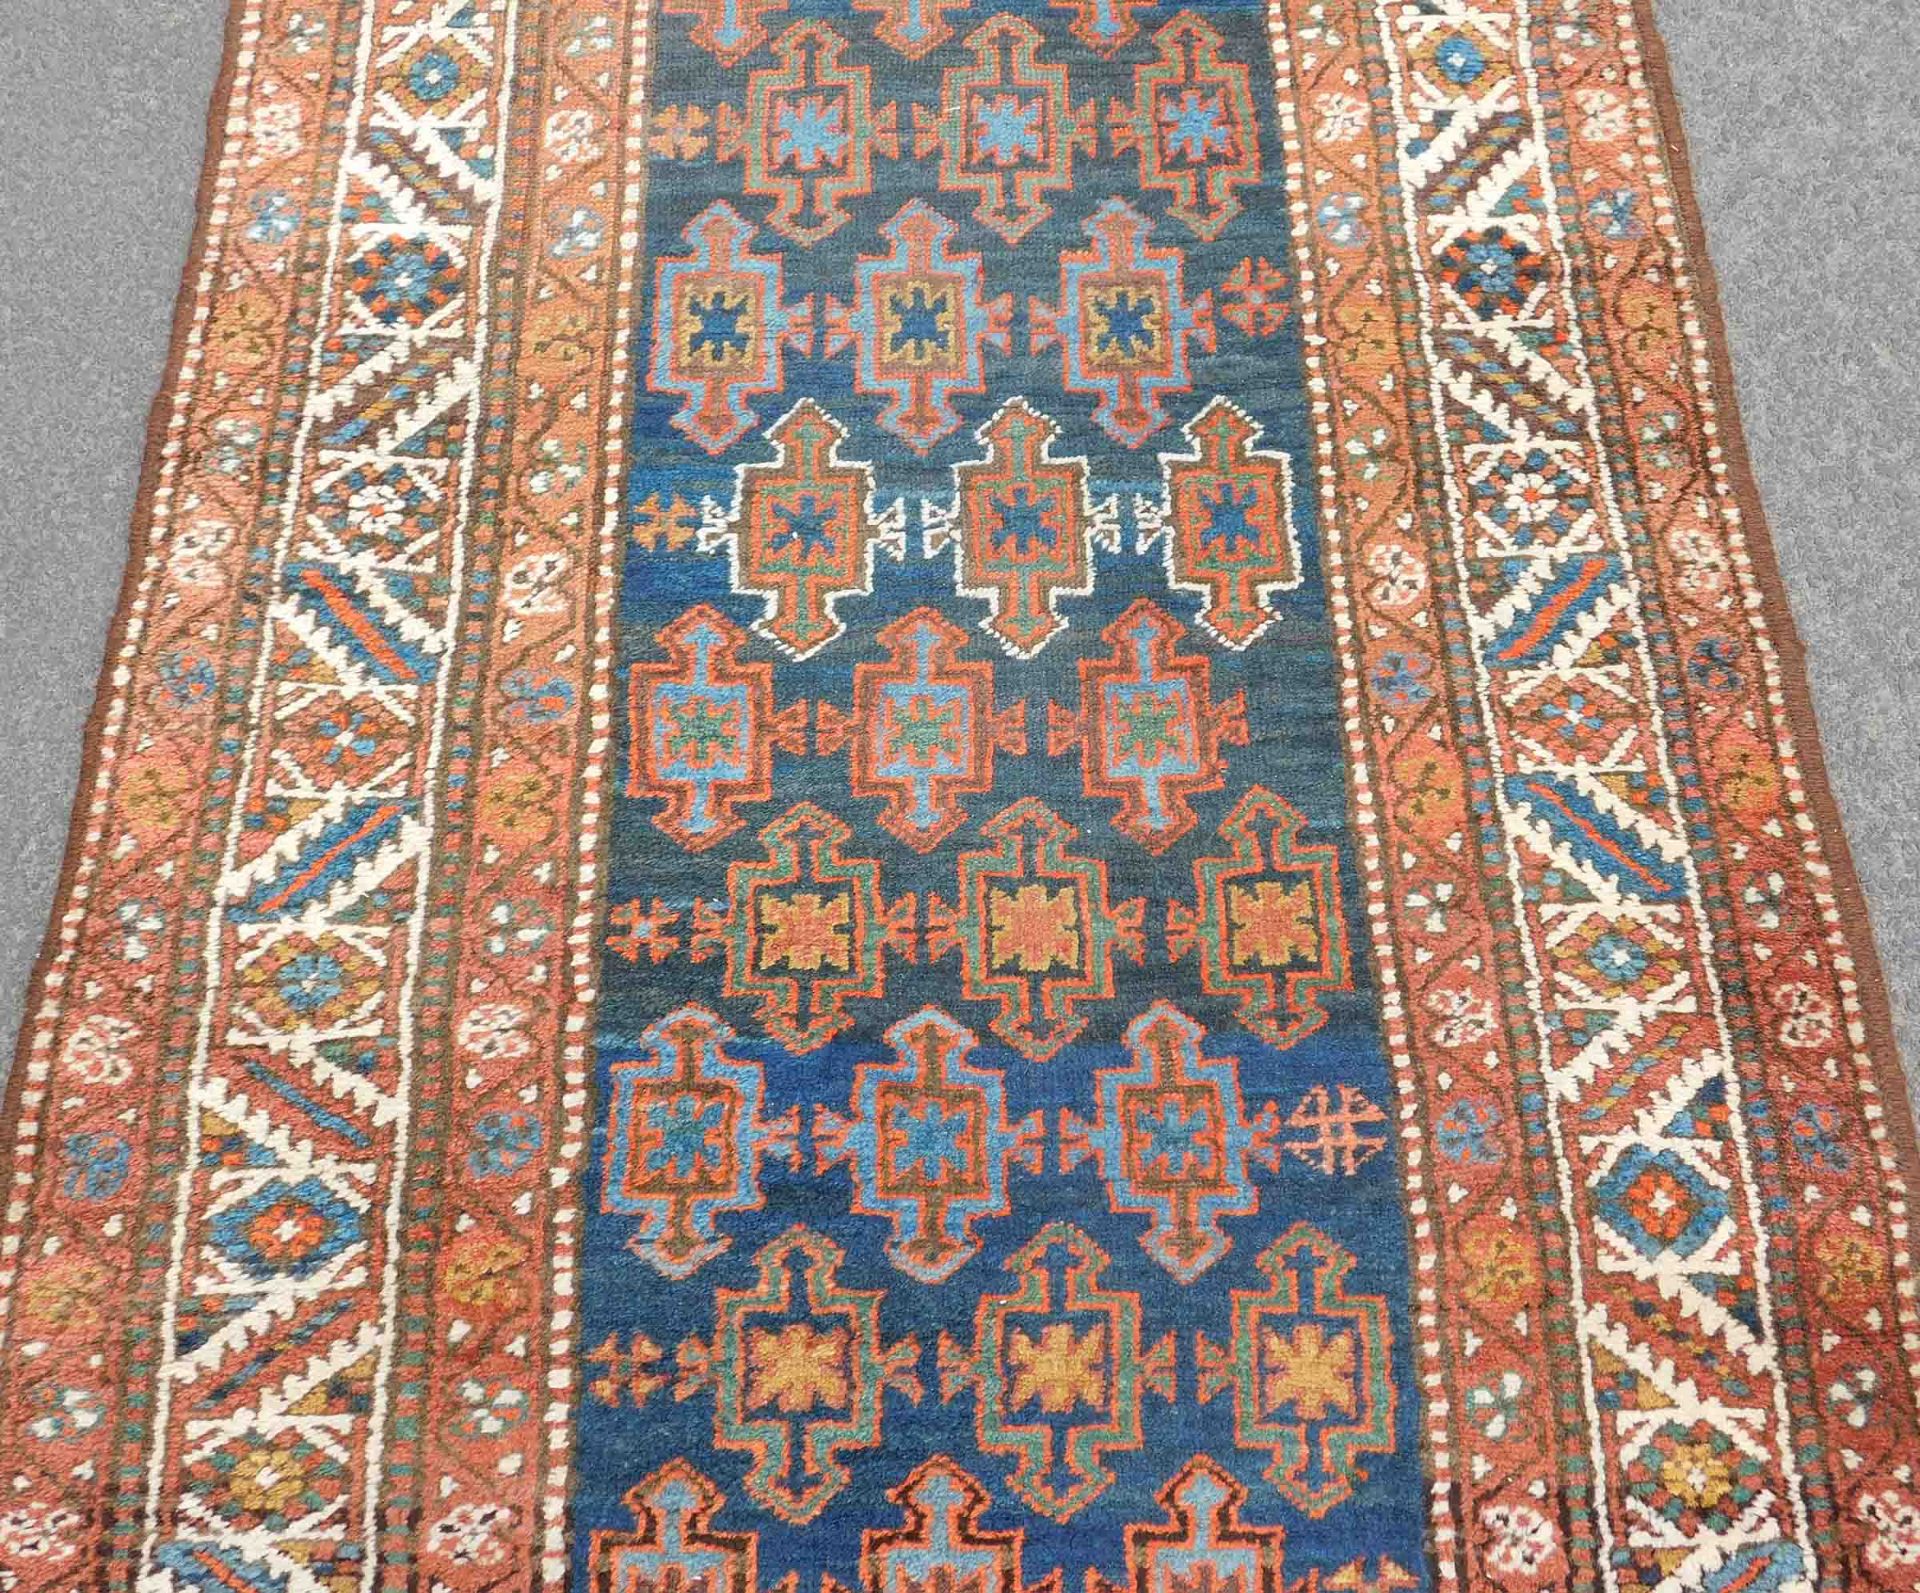 Heriz Persian rug. Runner. Iran. Antique, around 1912-1913.Knotted by hand. Wool on wool. Probably - Image 5 of 8